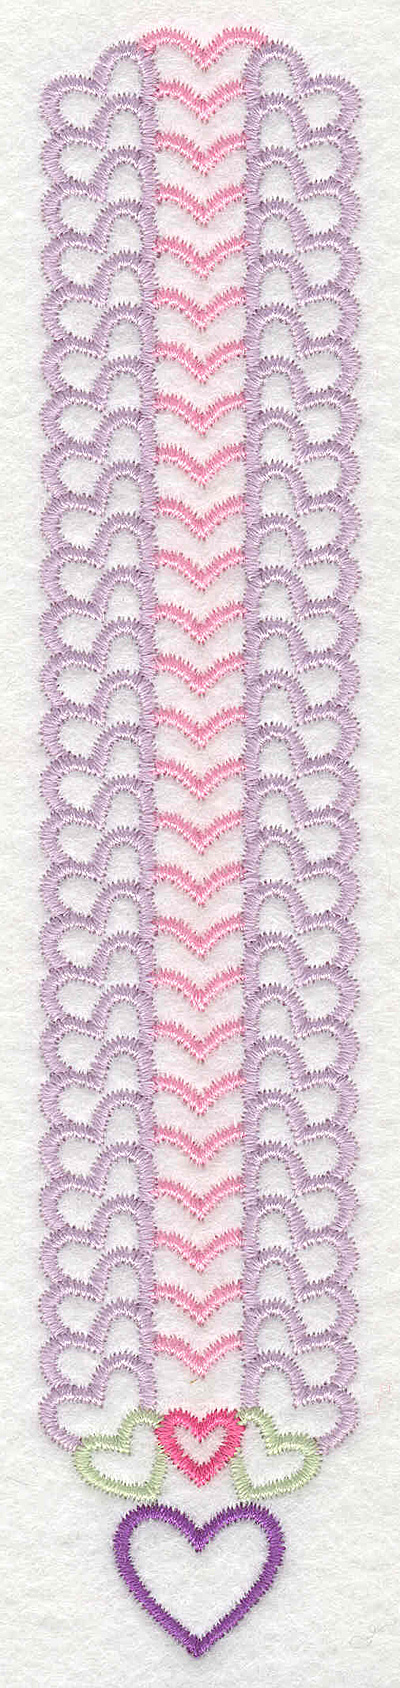 Embroidery Design: Hearts Stacked Colorful Large1.37w X 6.91h